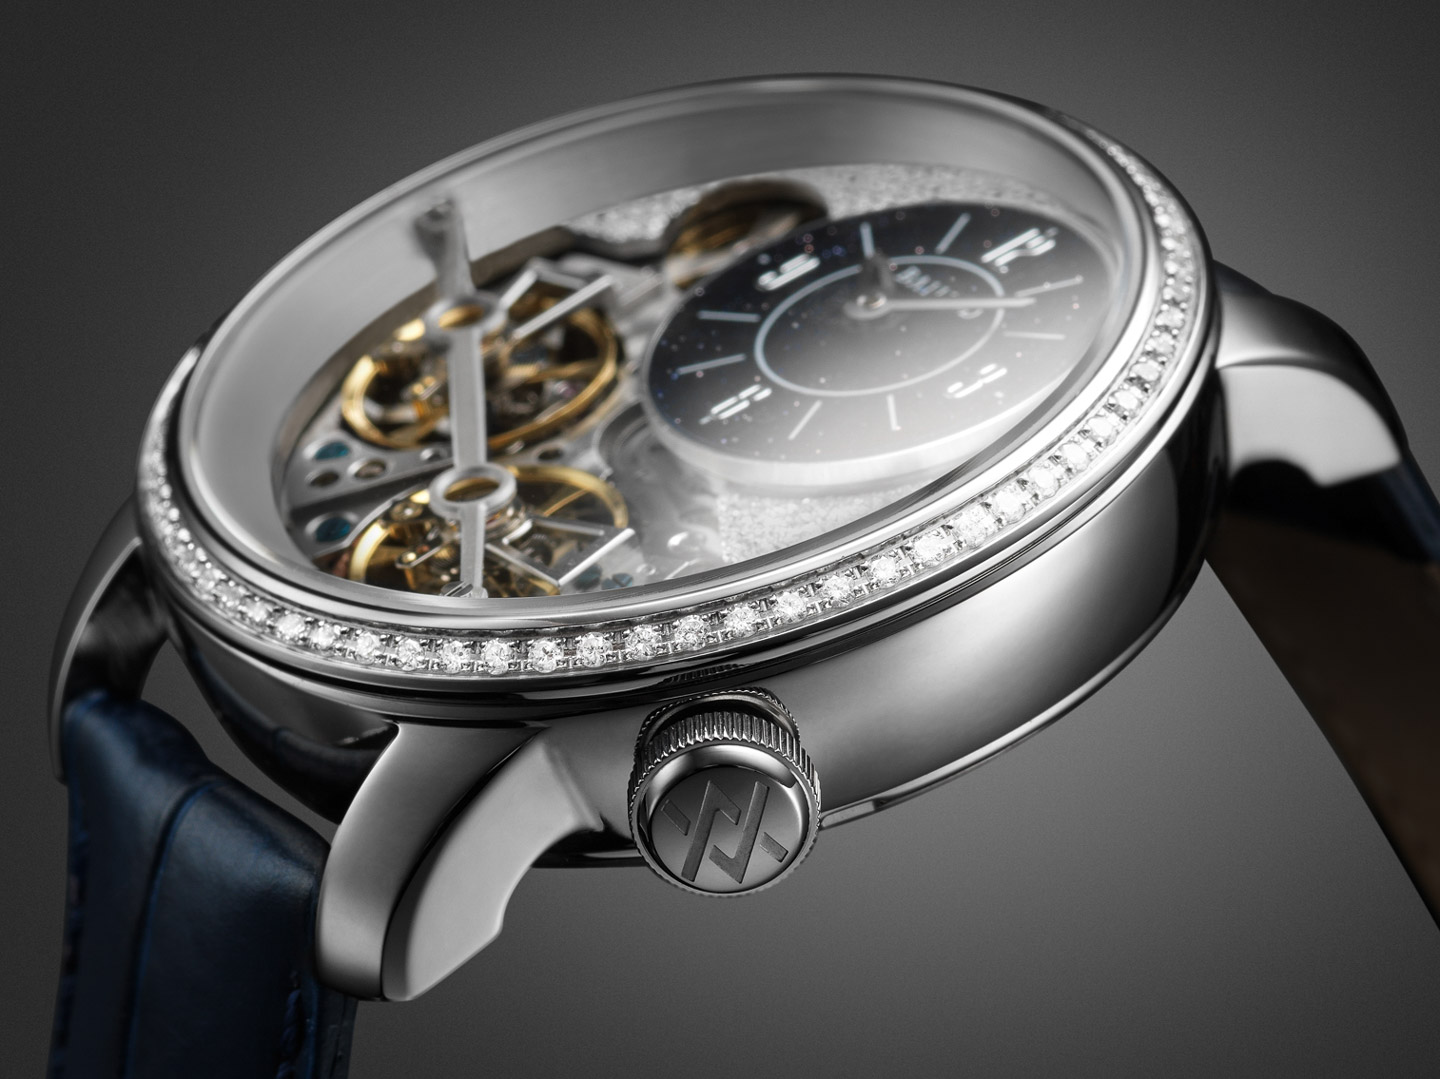 BA111OD Chapter 2 Diamonds Collection & Novel Community Sales Concept For Watch Industry